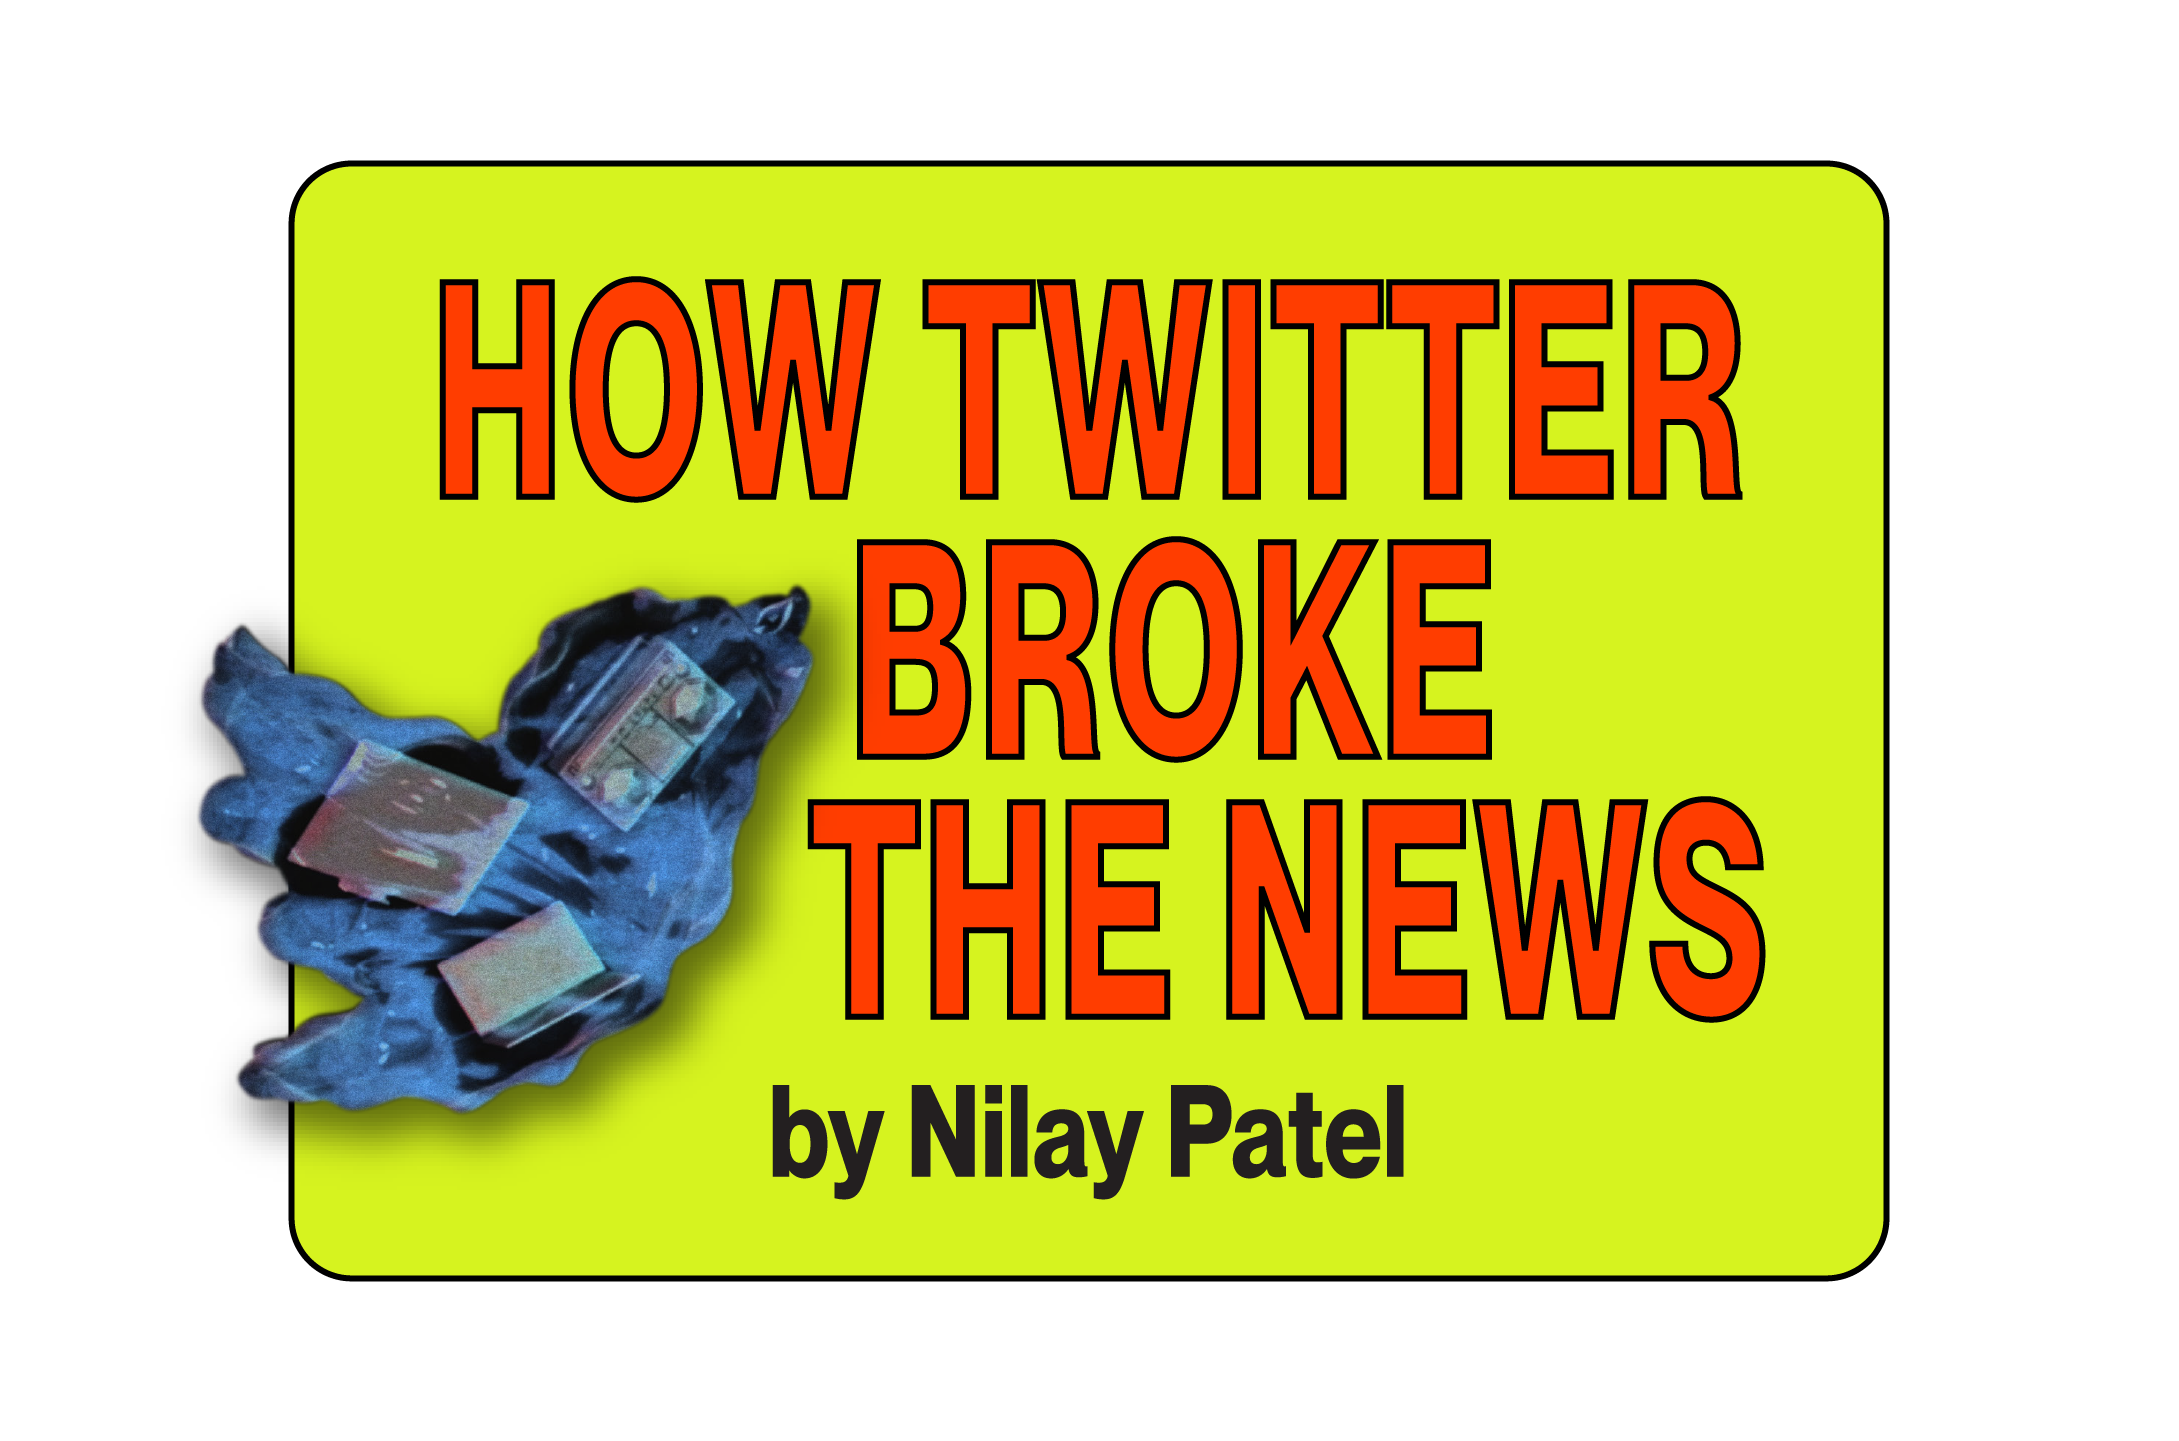 How Twitter Broke the News, by Nilay Patel